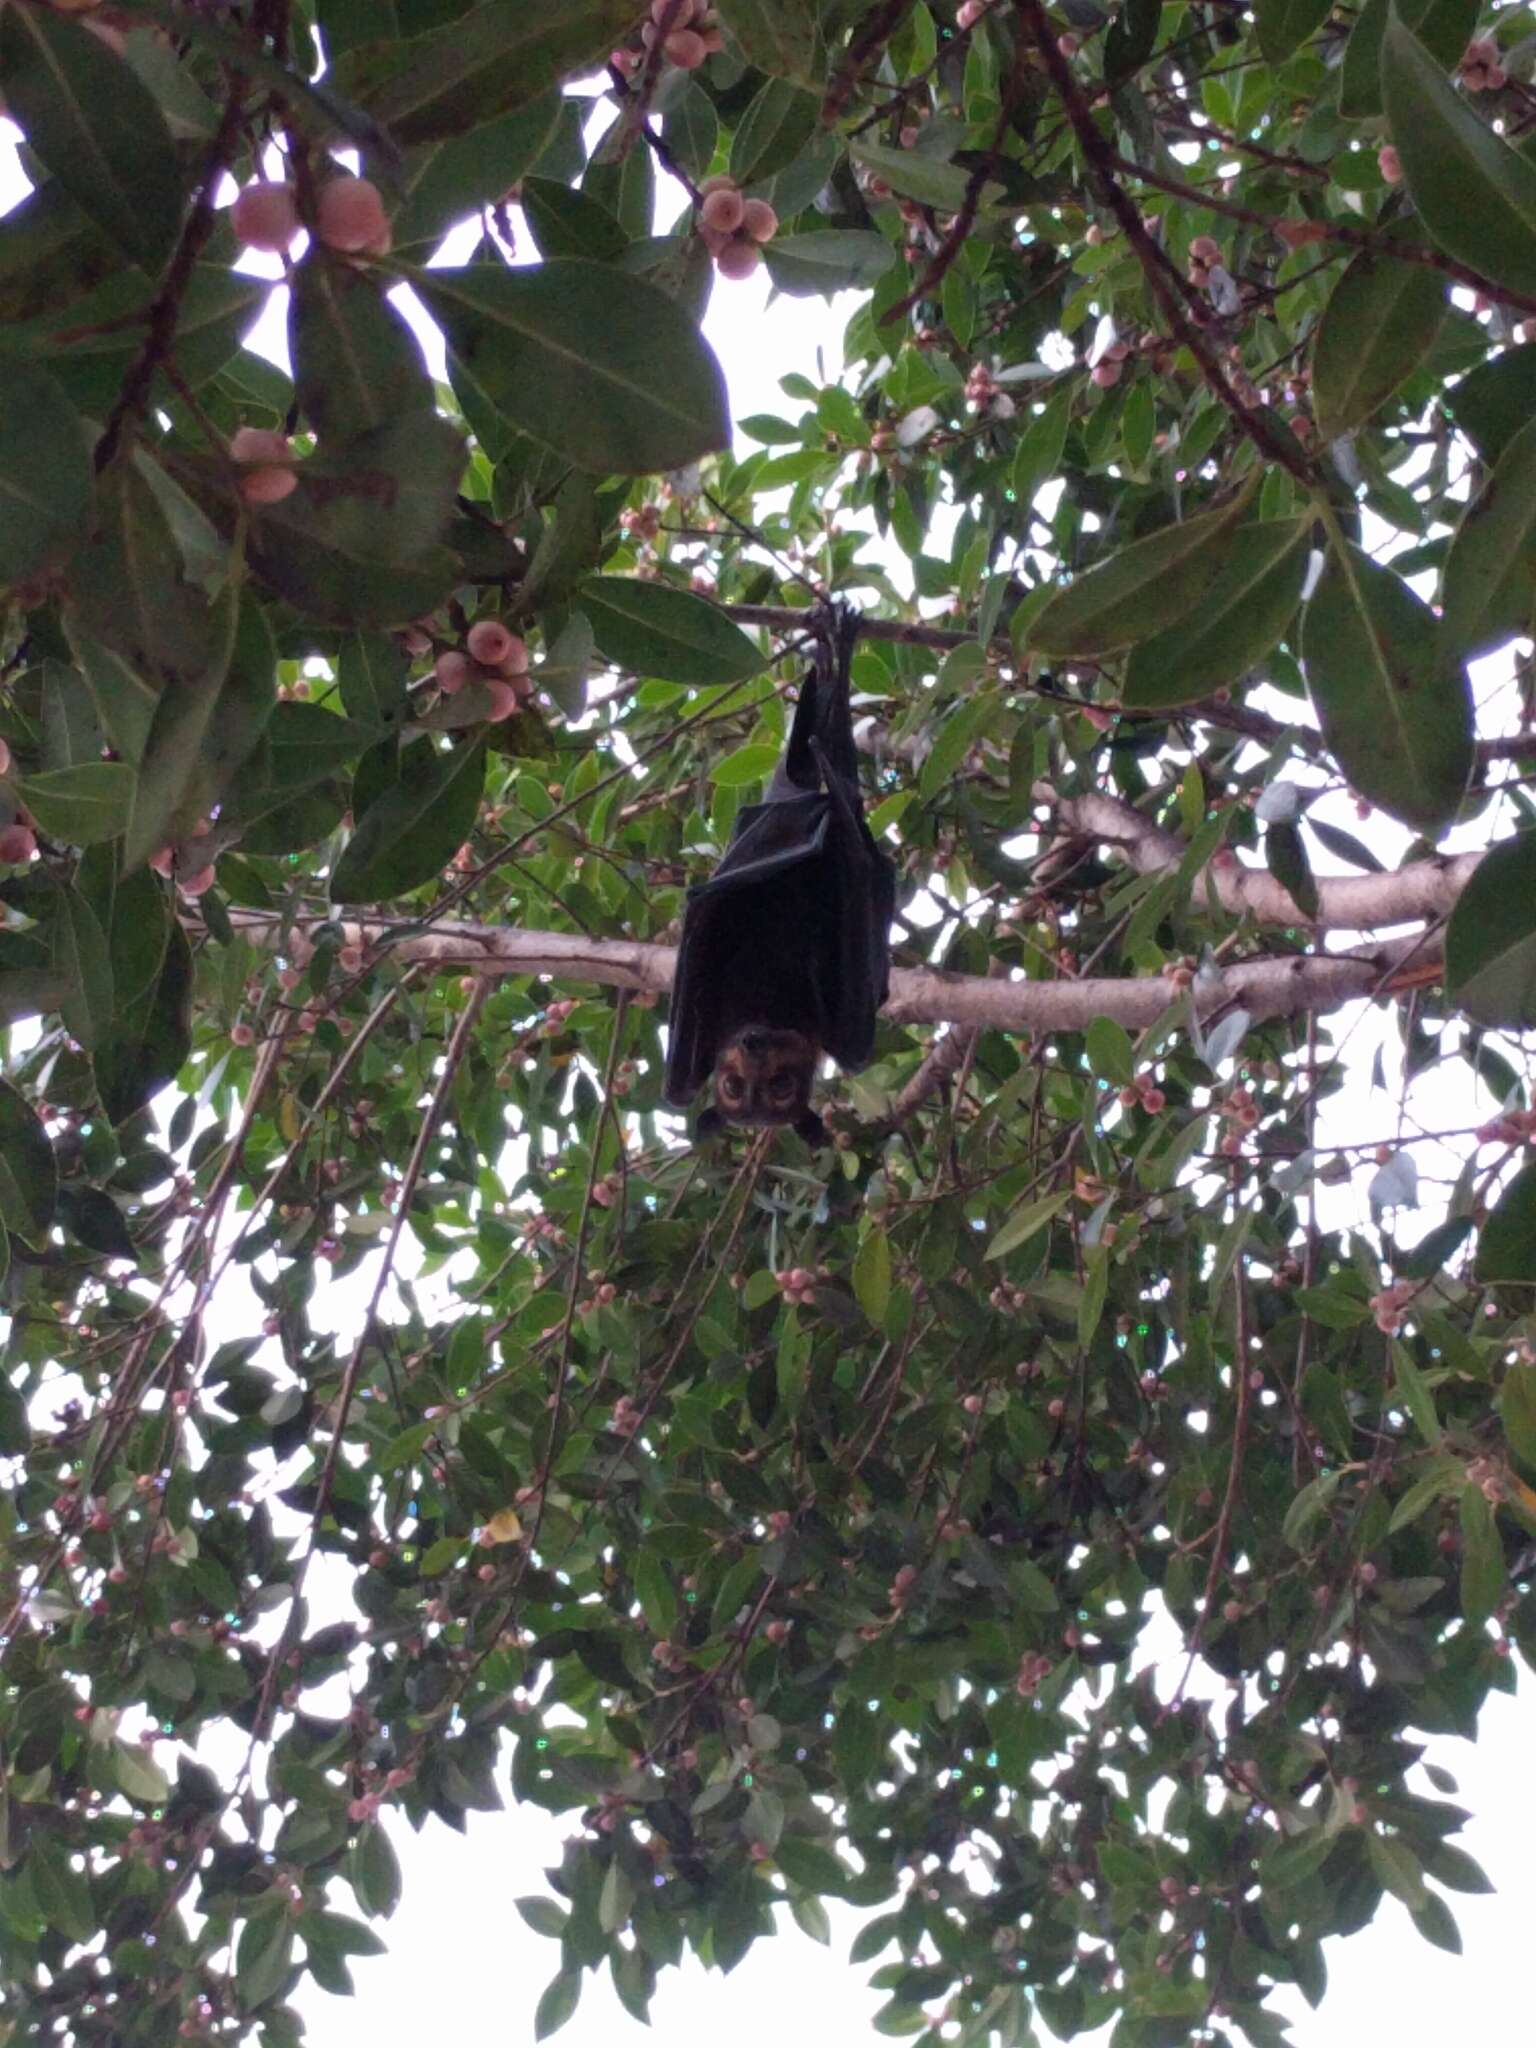 Image of Spectacled Flying Fox